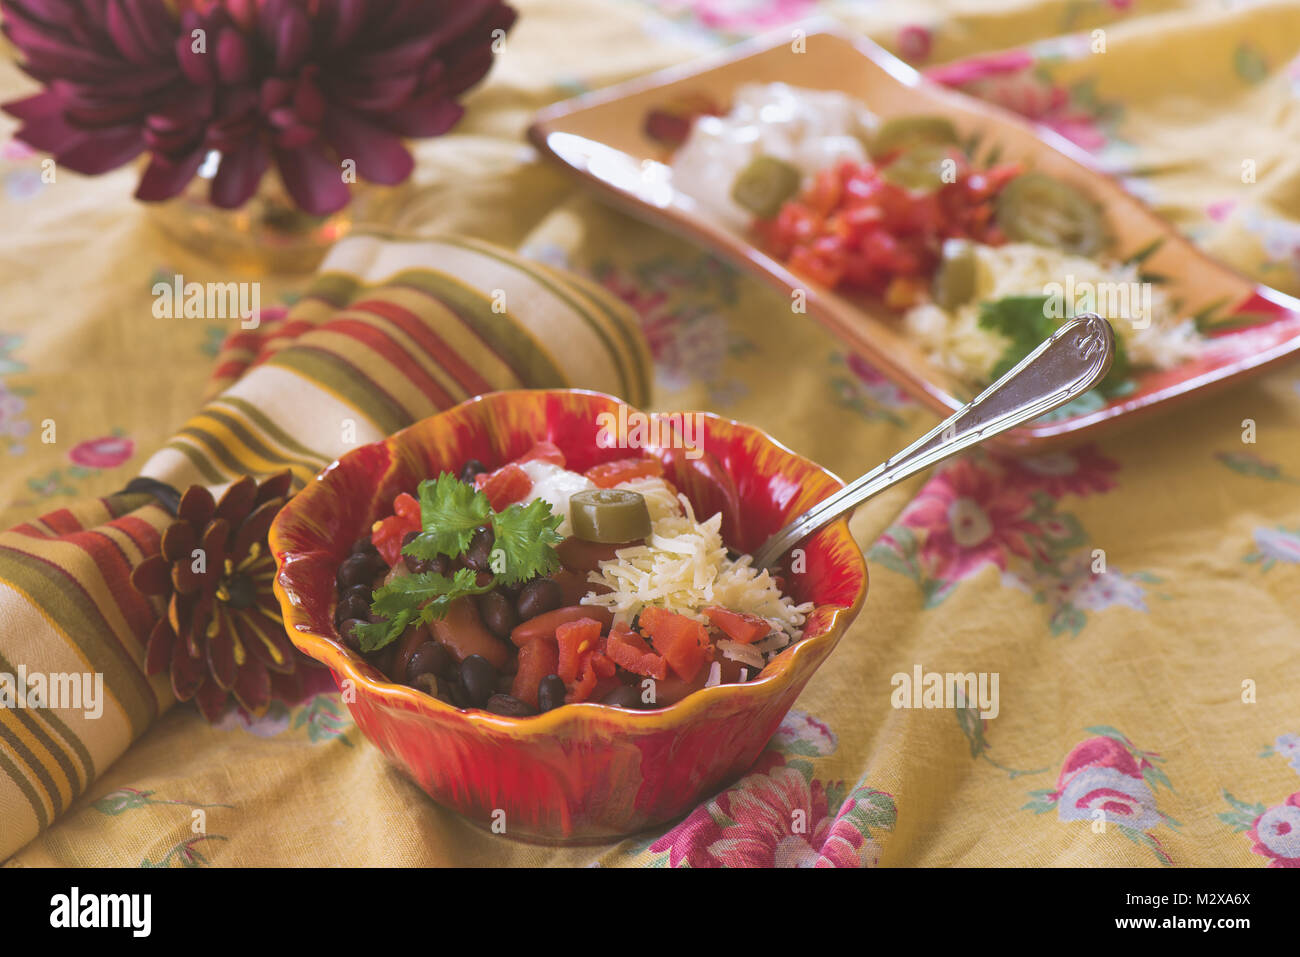 A. bowl of Chili on a colorful background Stock Photo